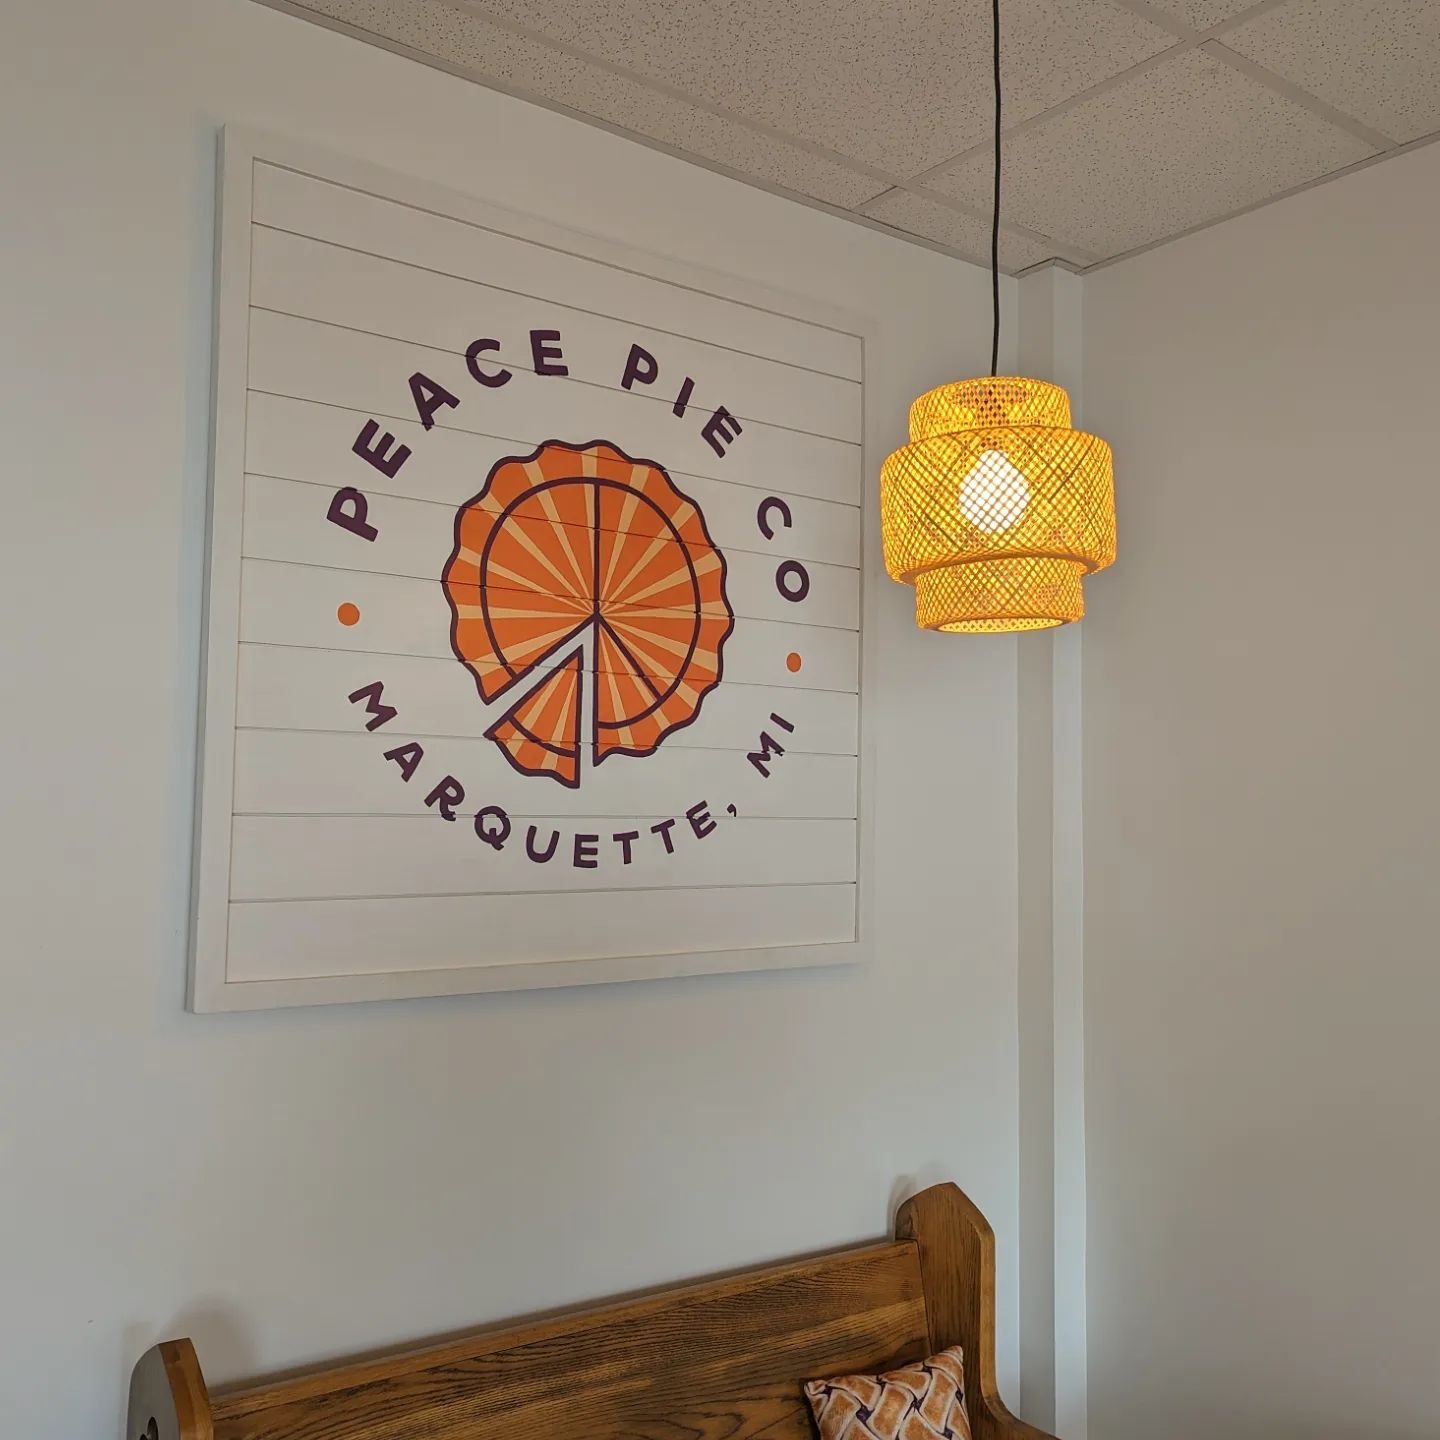 Hand painted sign for @peacepiecompany at their new space! I designed this logo years ago, so it's exciting to see Lorri and her team finally have their own storefront ☮️